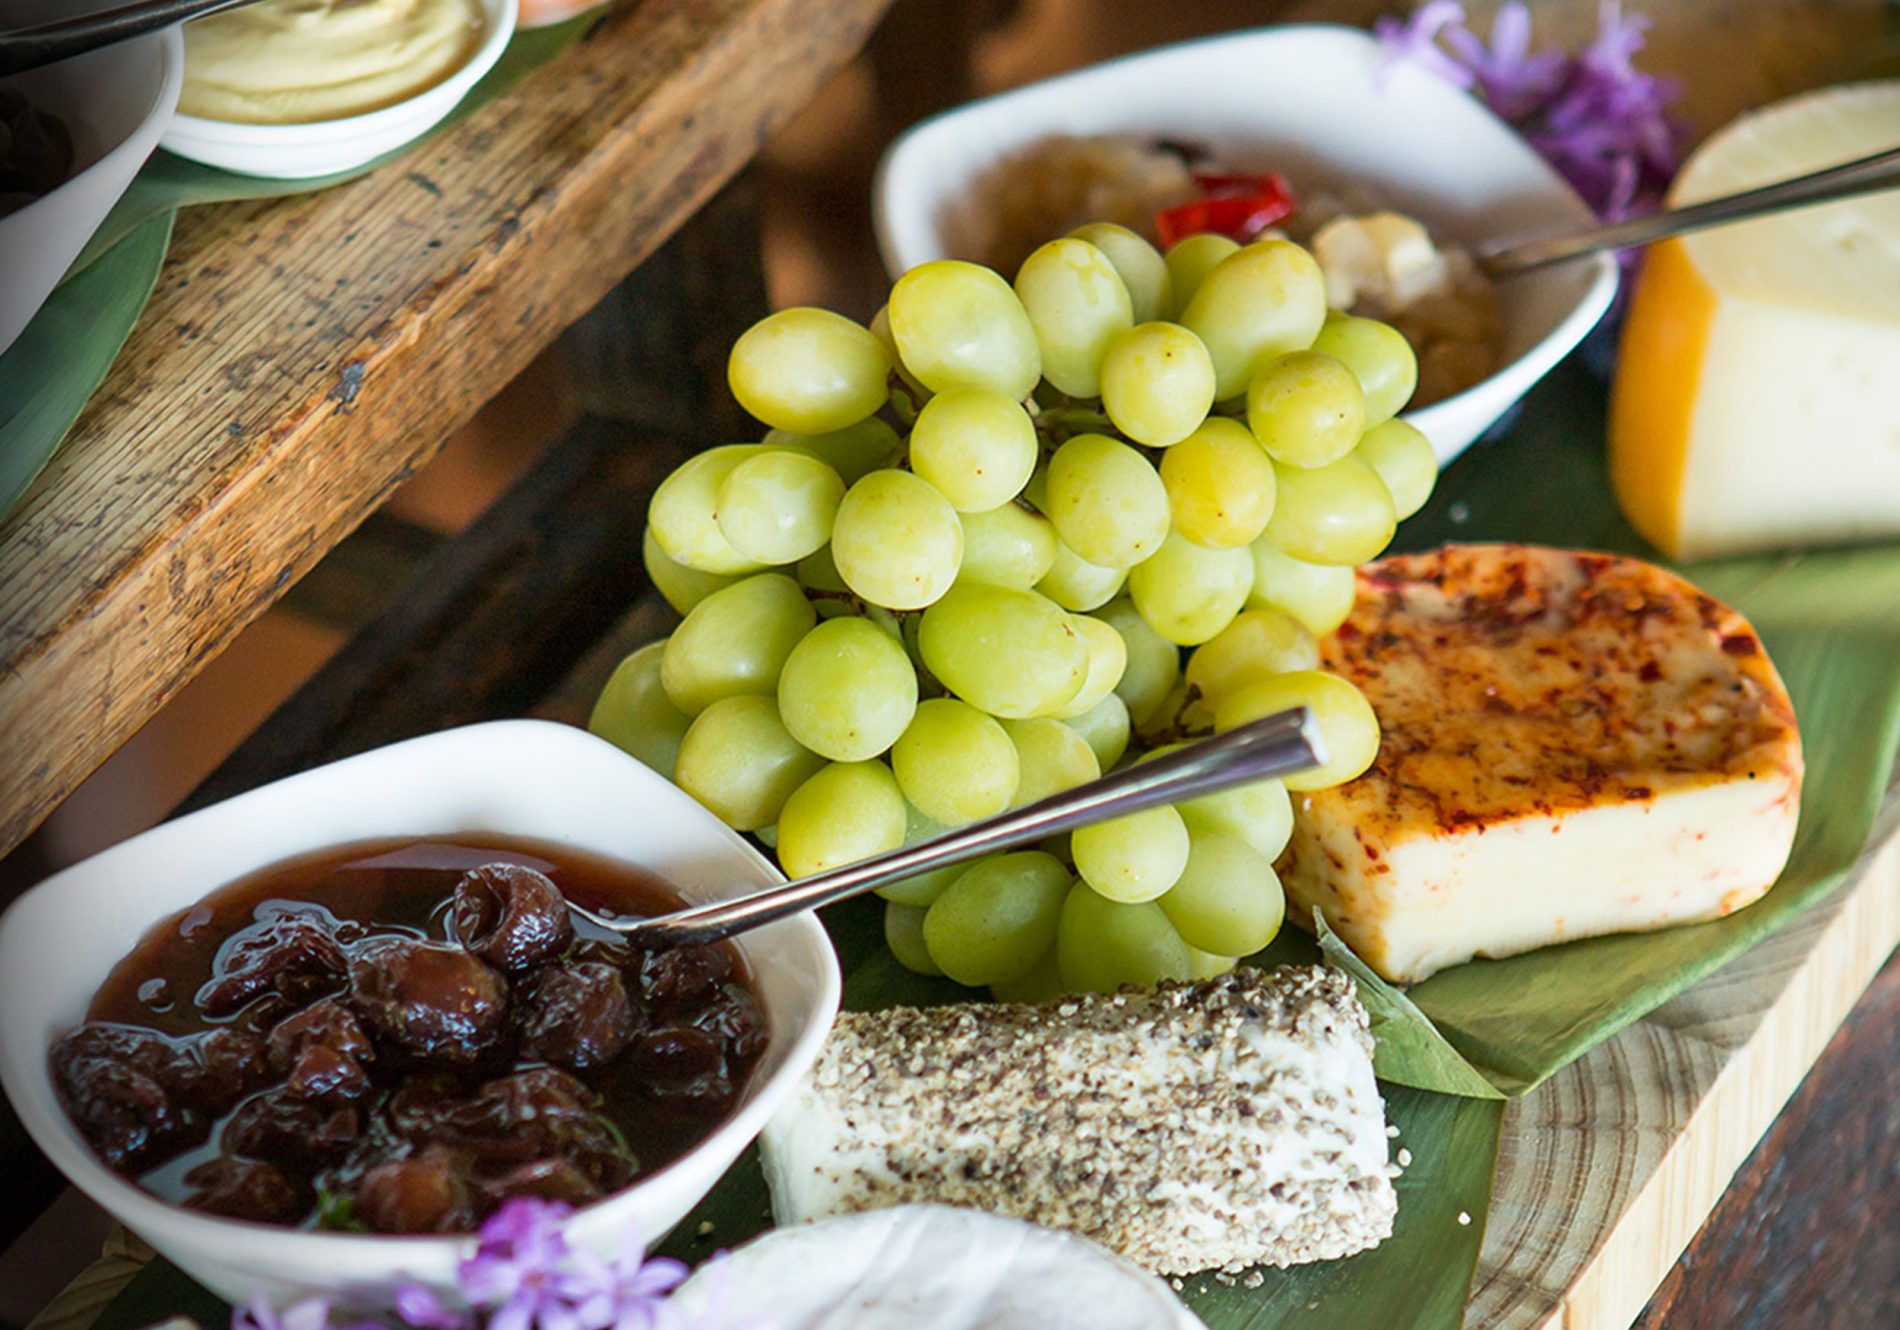 A platter of cheese and grapes